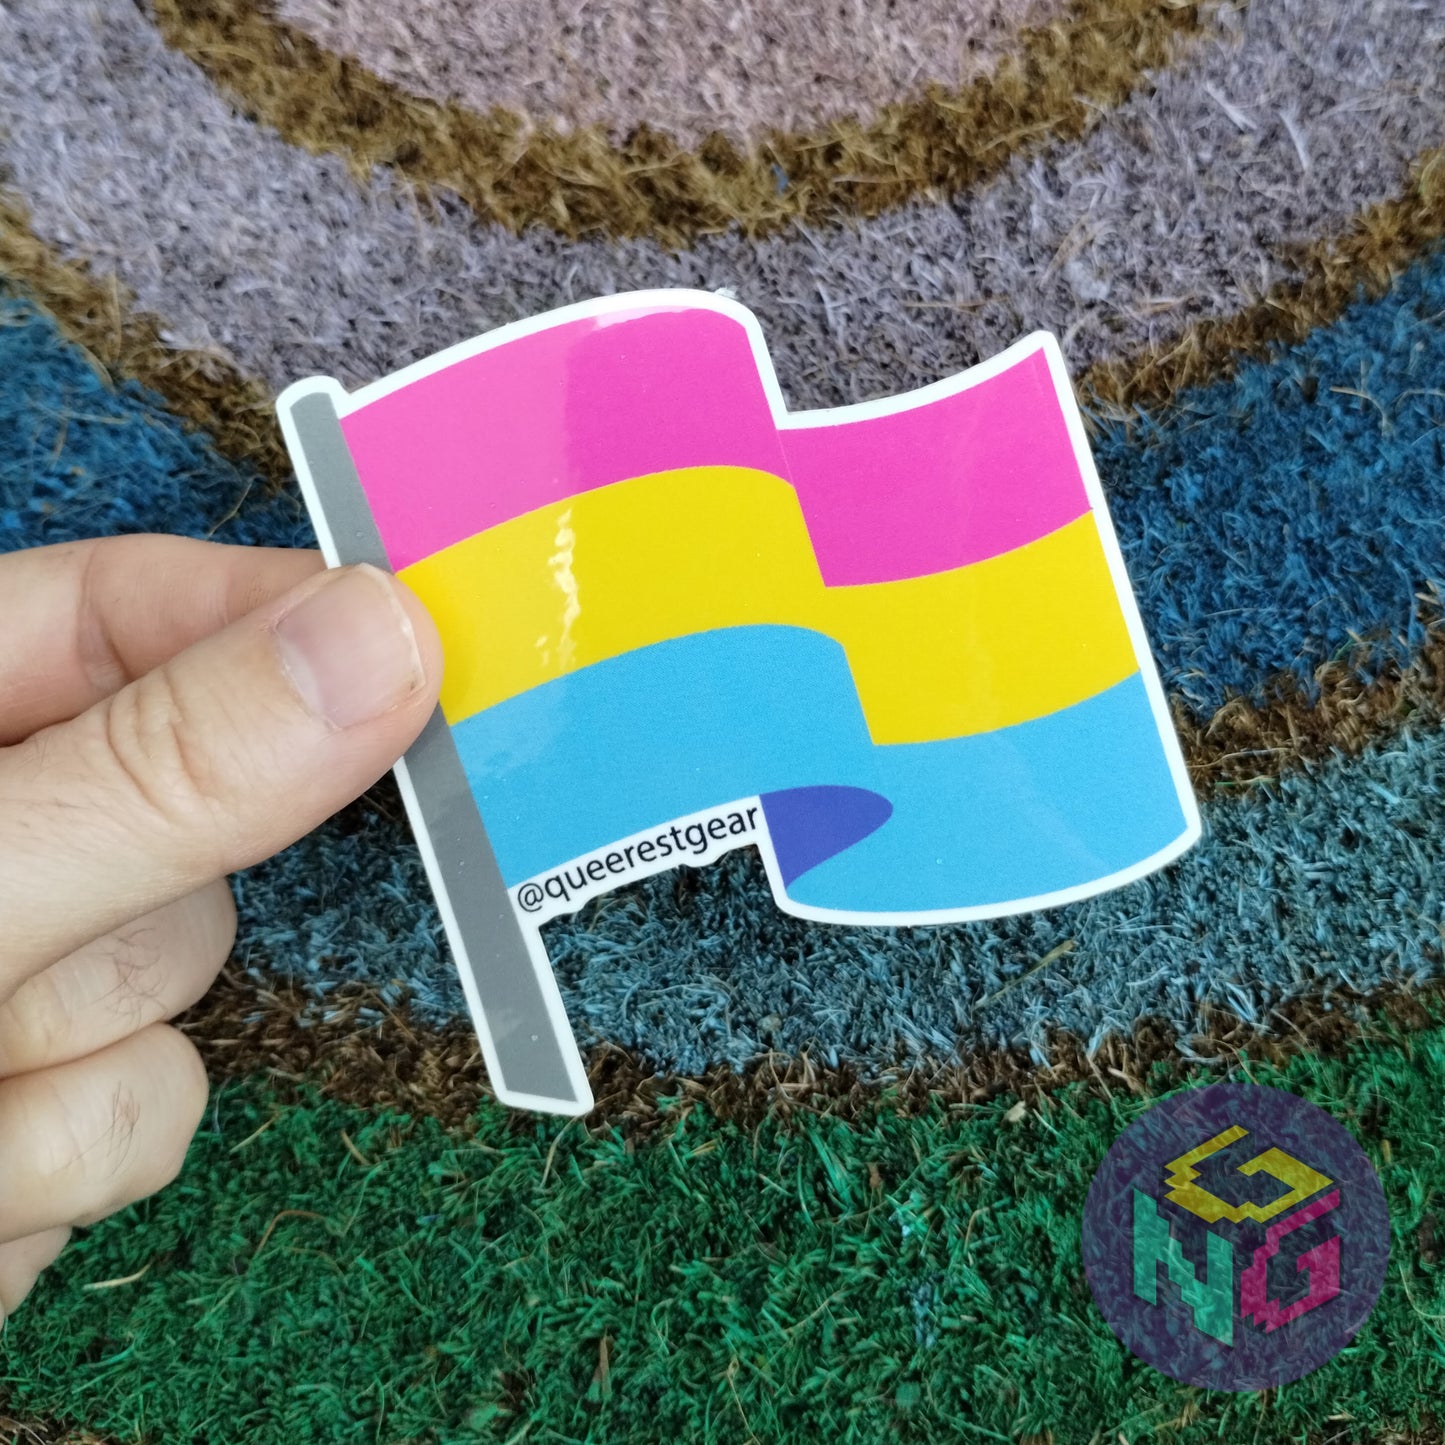 pansexual flag sticker held in front of rainbow welcome mat